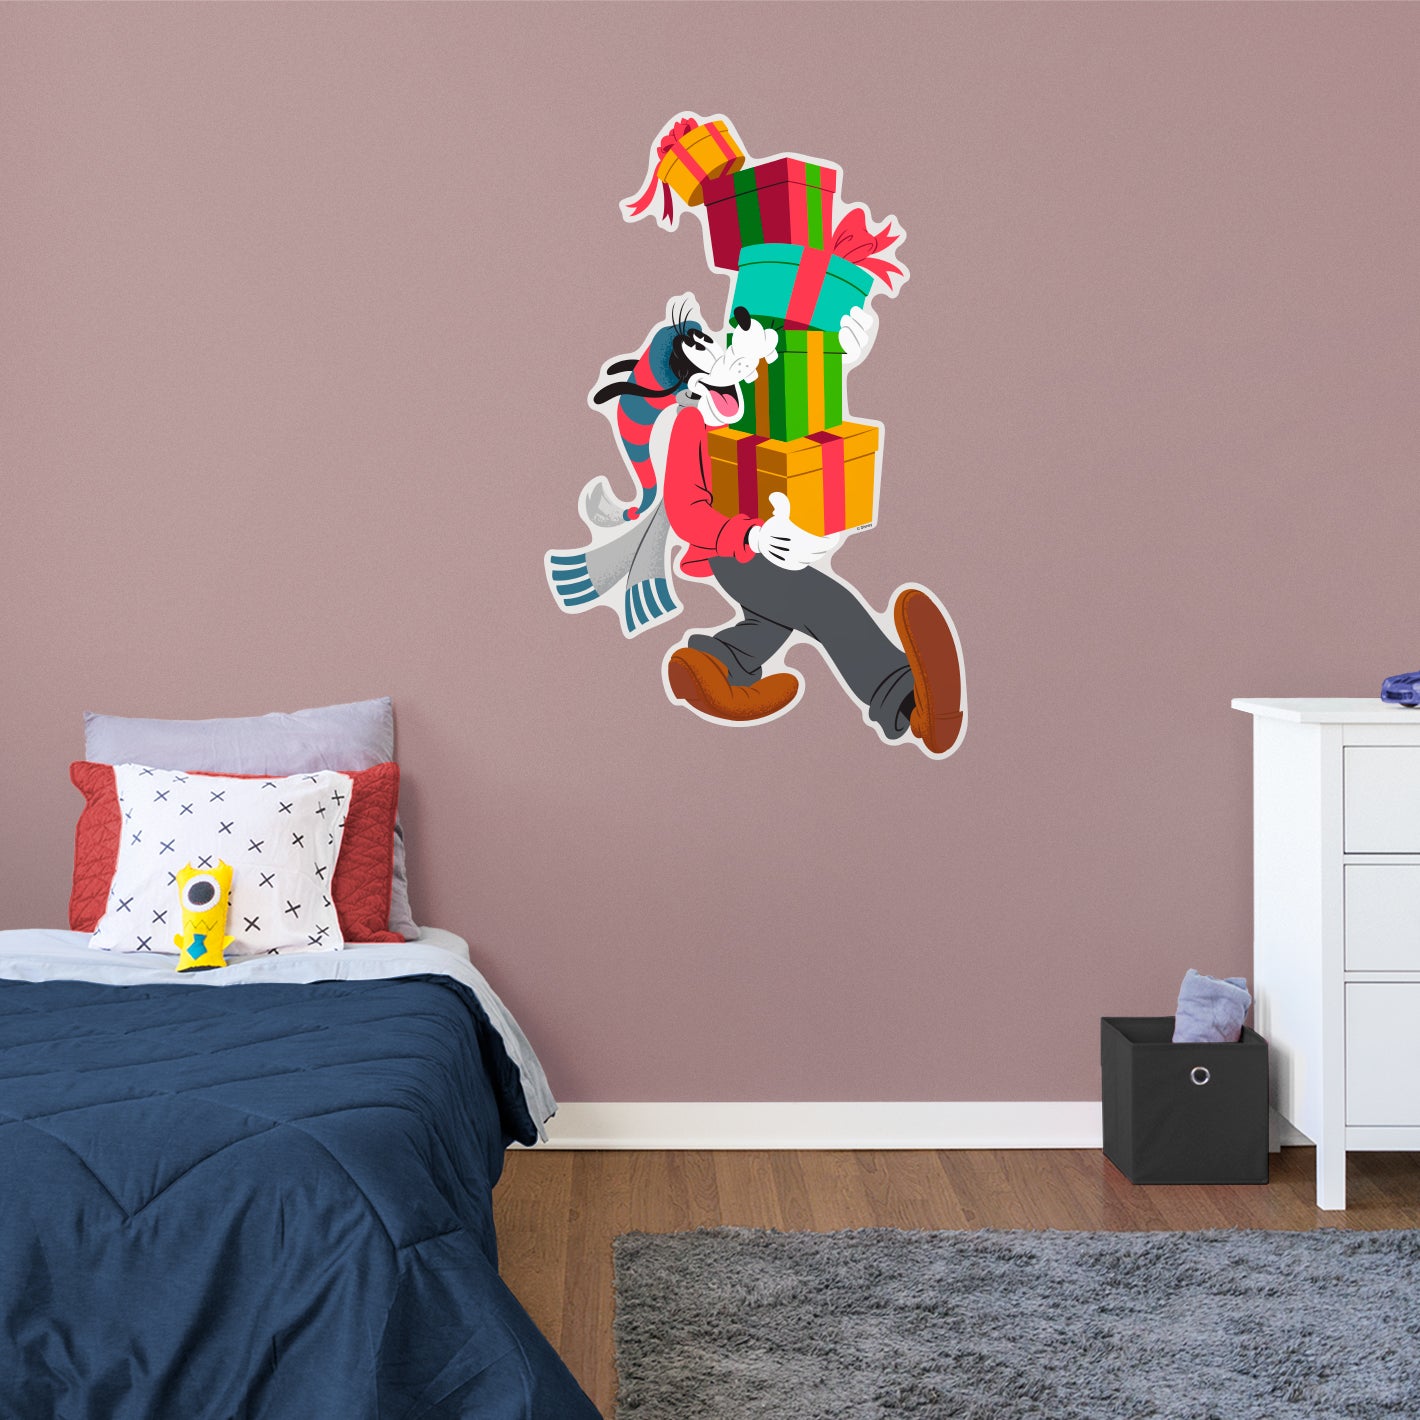 Festive Cheer: Goofy Holiday Real Big - Officially Licensed Disney Removable Adhesive Decal